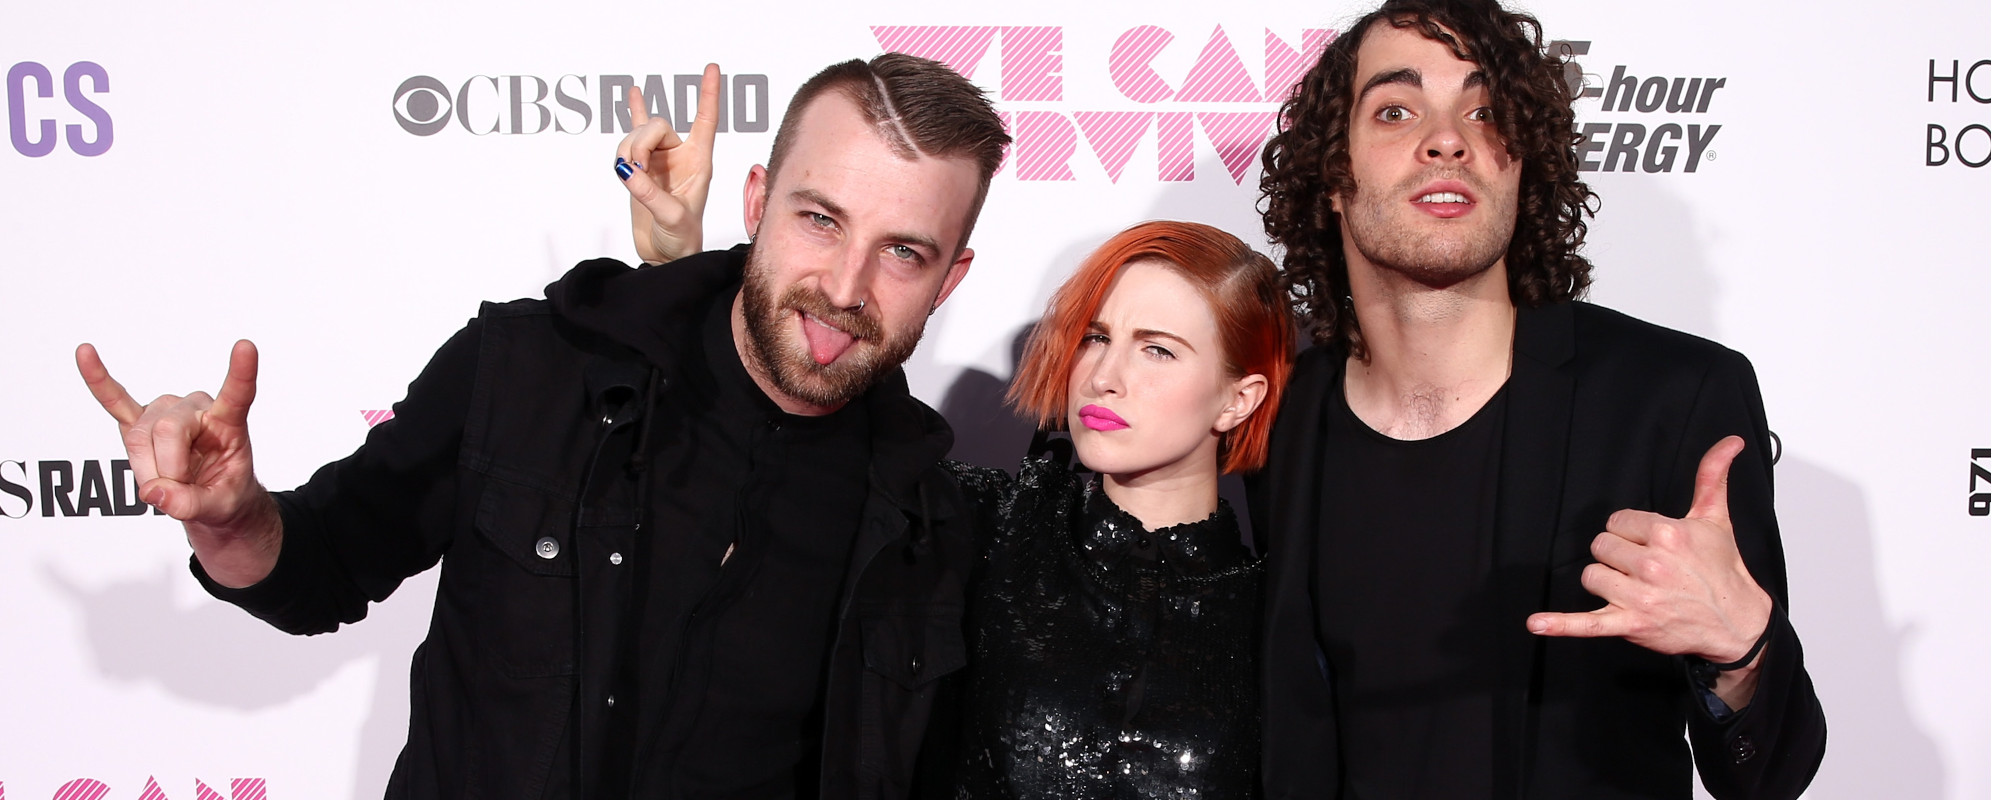 Paramore Covers Talking Heads' 'Burning Down the House' in A24 Release